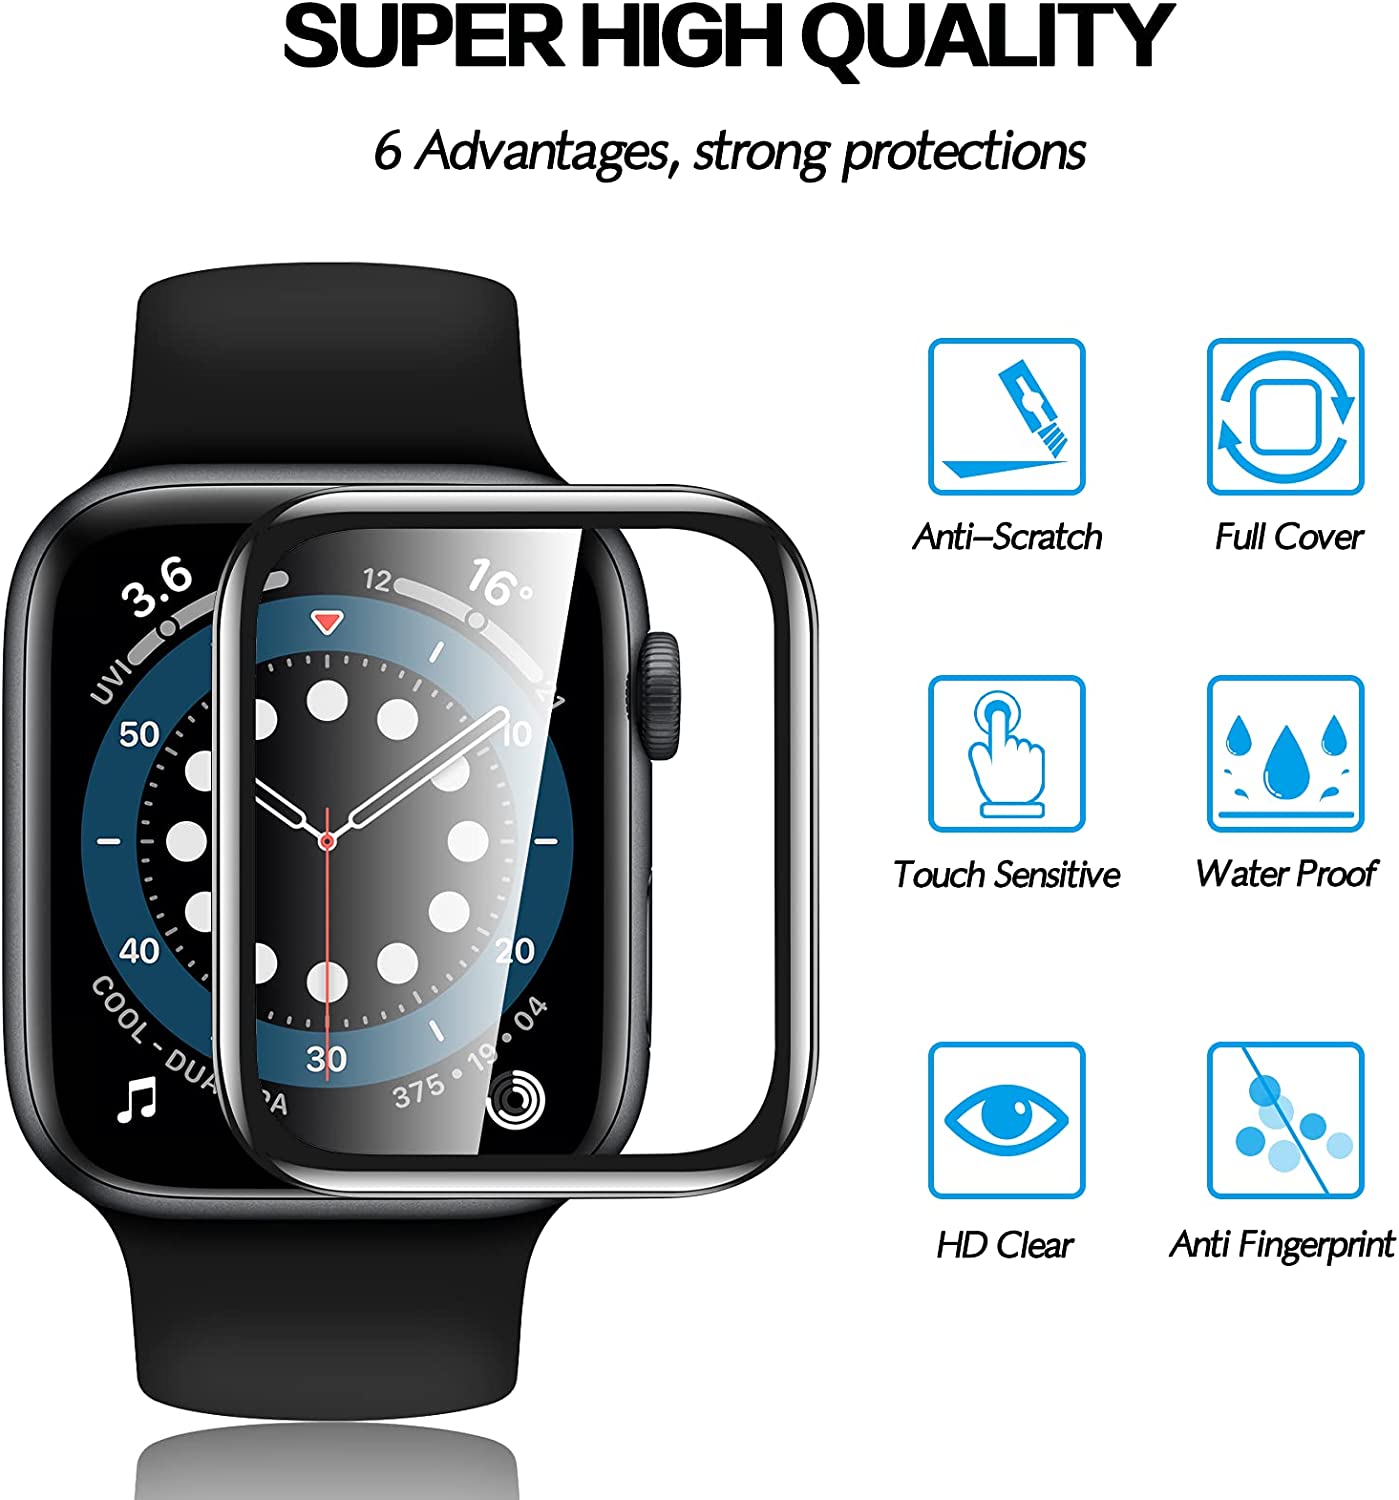 Premium Protection PMMA Screen Protector for Apple WATCH Series 3/2/1 [38MM] (Clear)